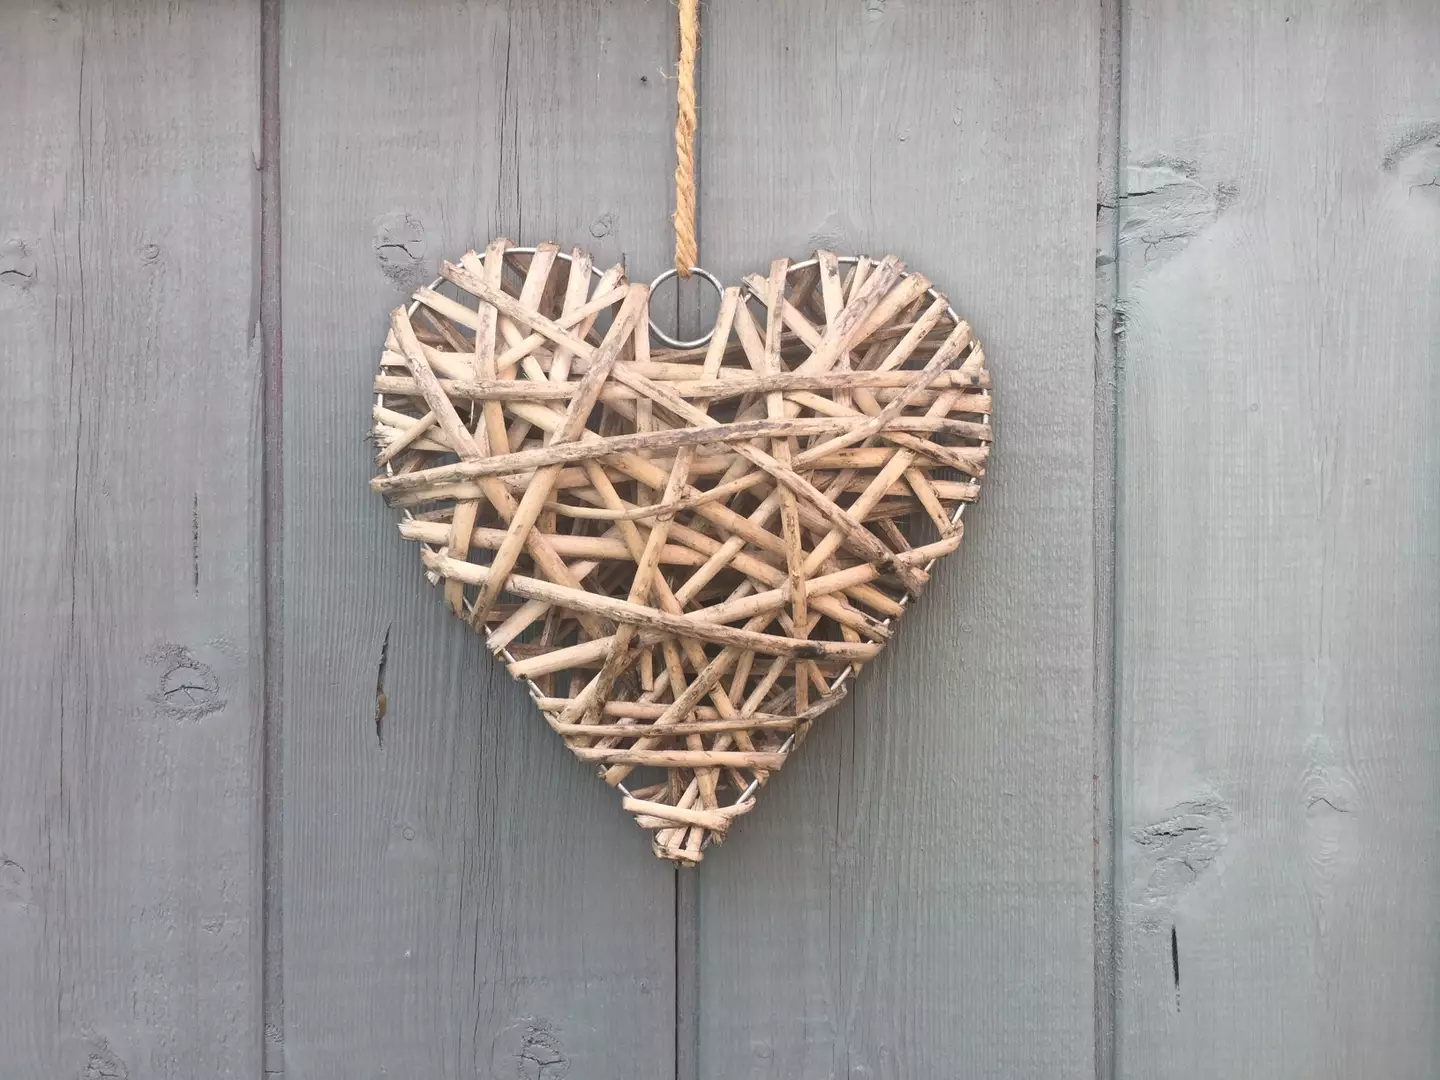 The wicker hearts are believed to indicate swingers.